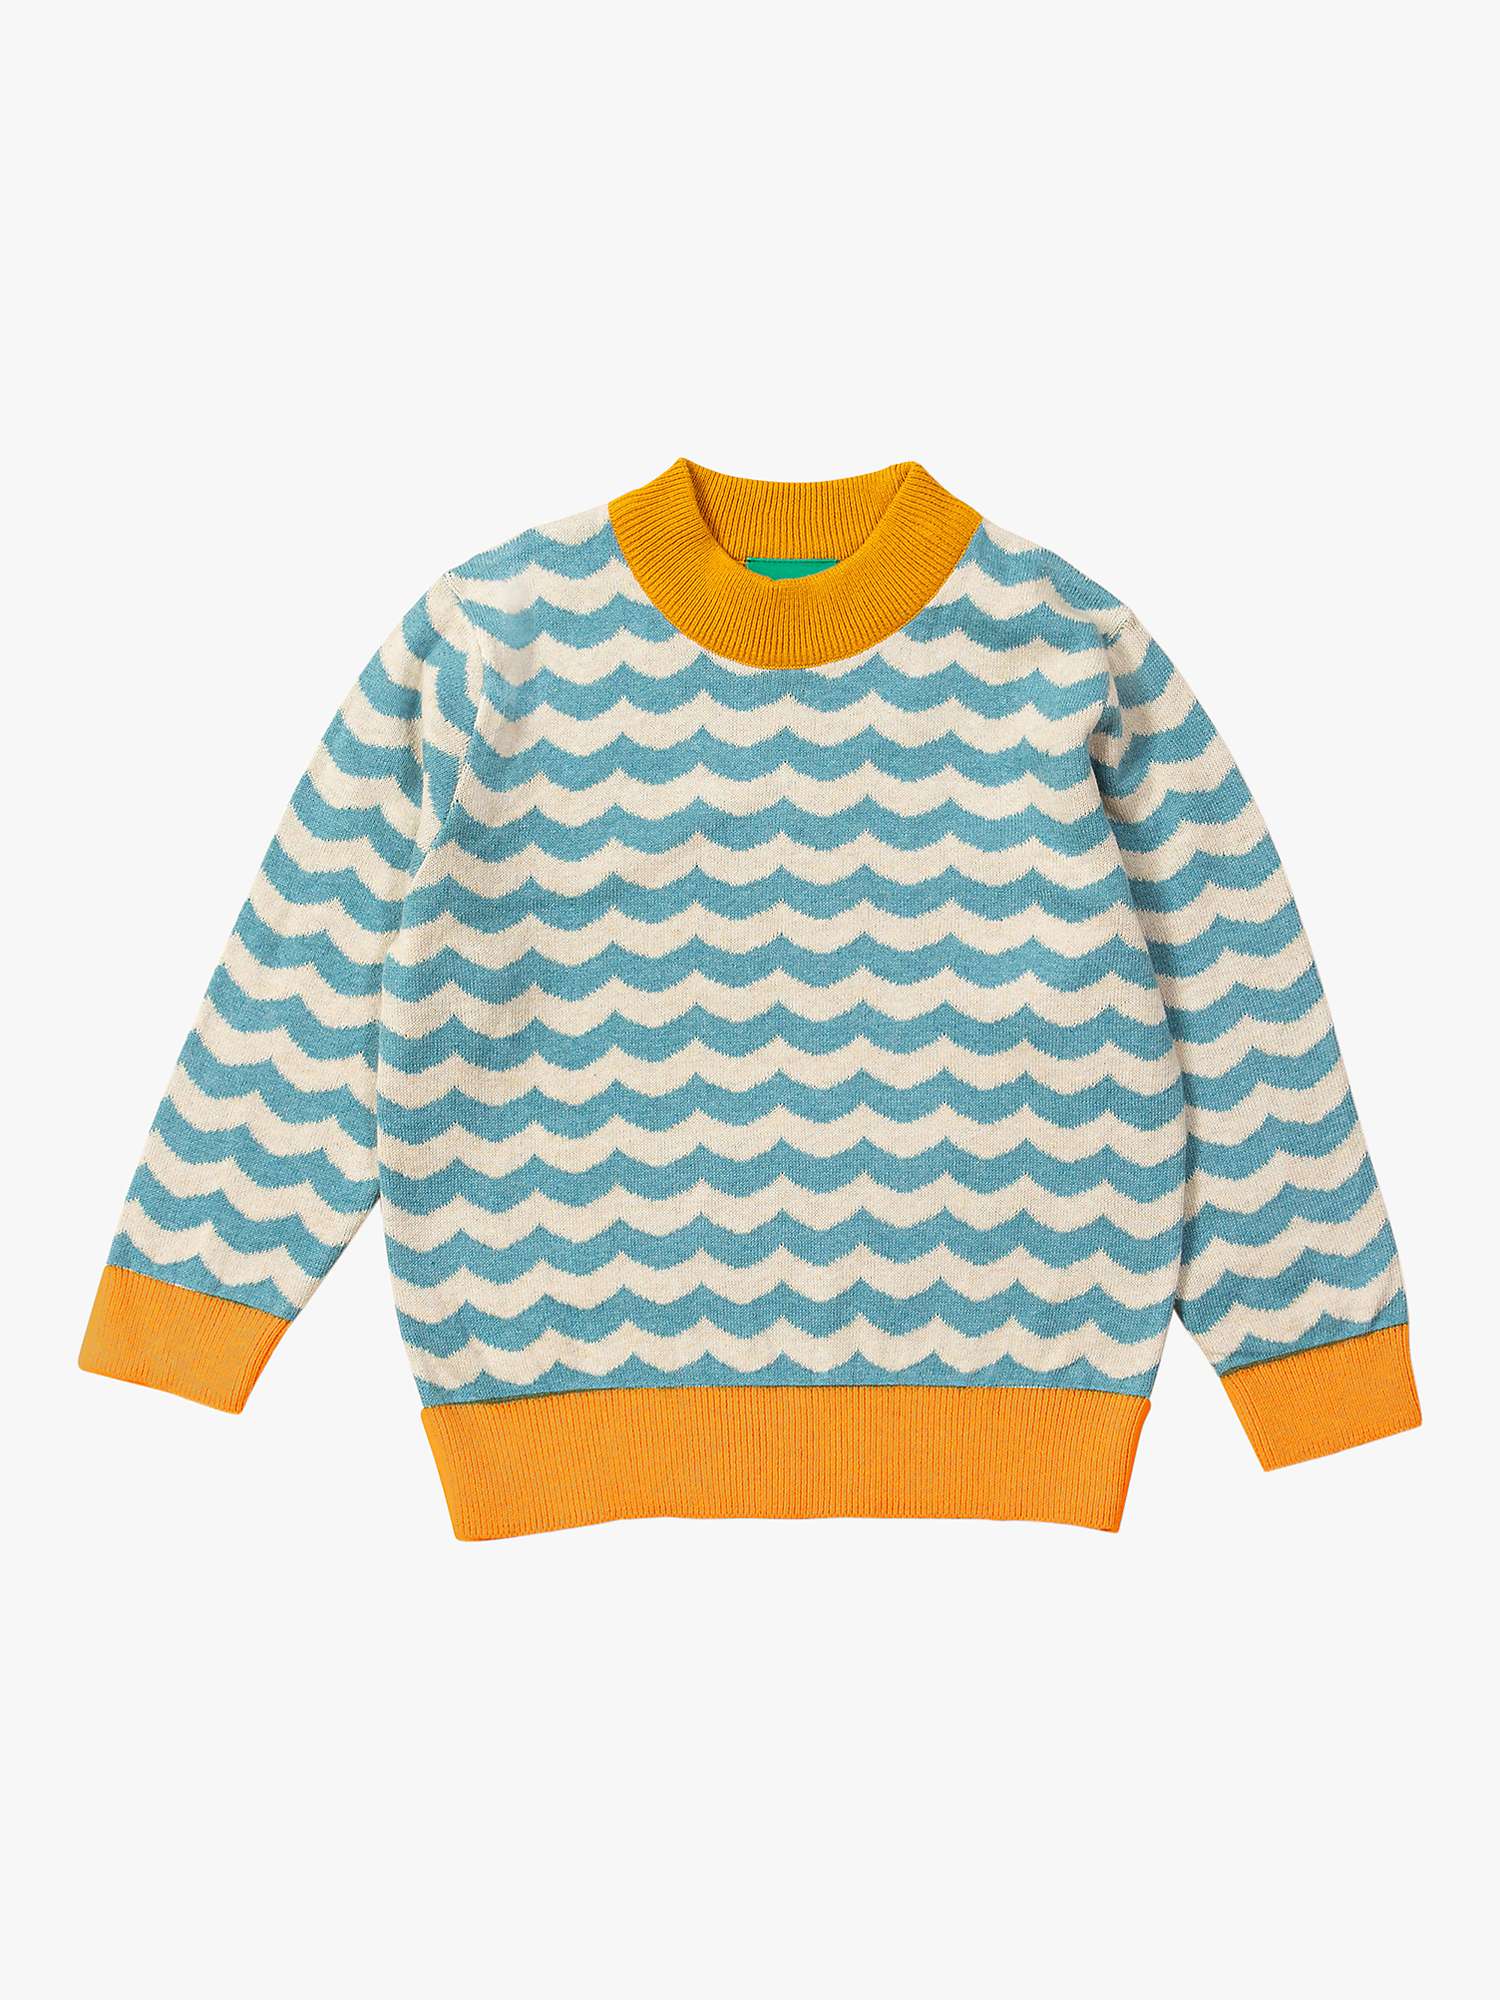 Buy Little Green Radicals Baby Organic Cotton From One To Another Sail Away Stripe Knit Jumper, Blue/Yellow Online at johnlewis.com